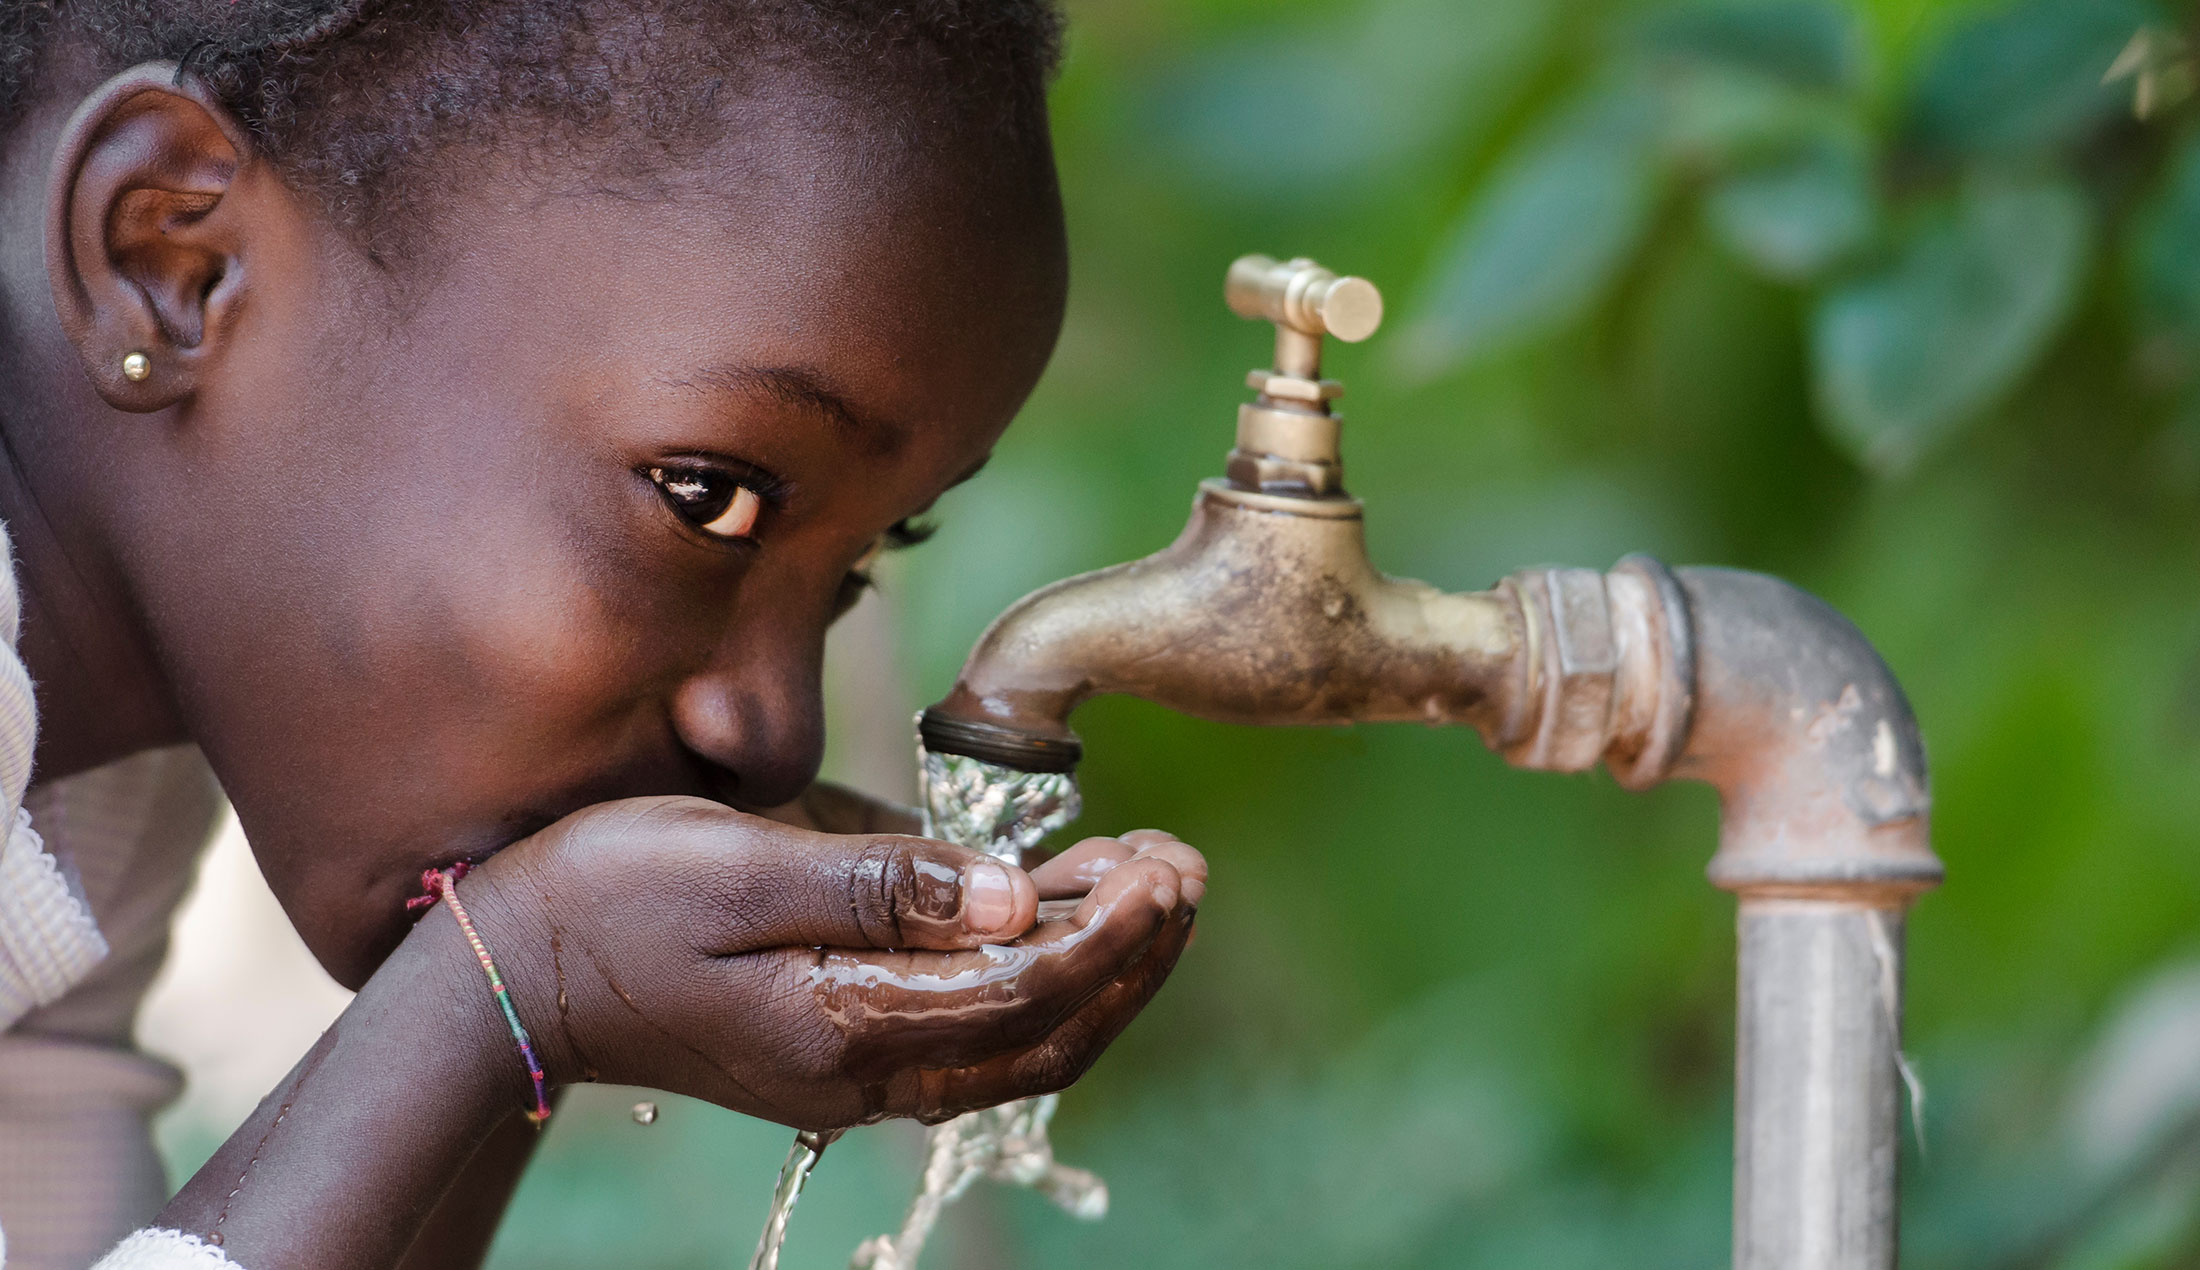 Child in Africa drinking water from a tap